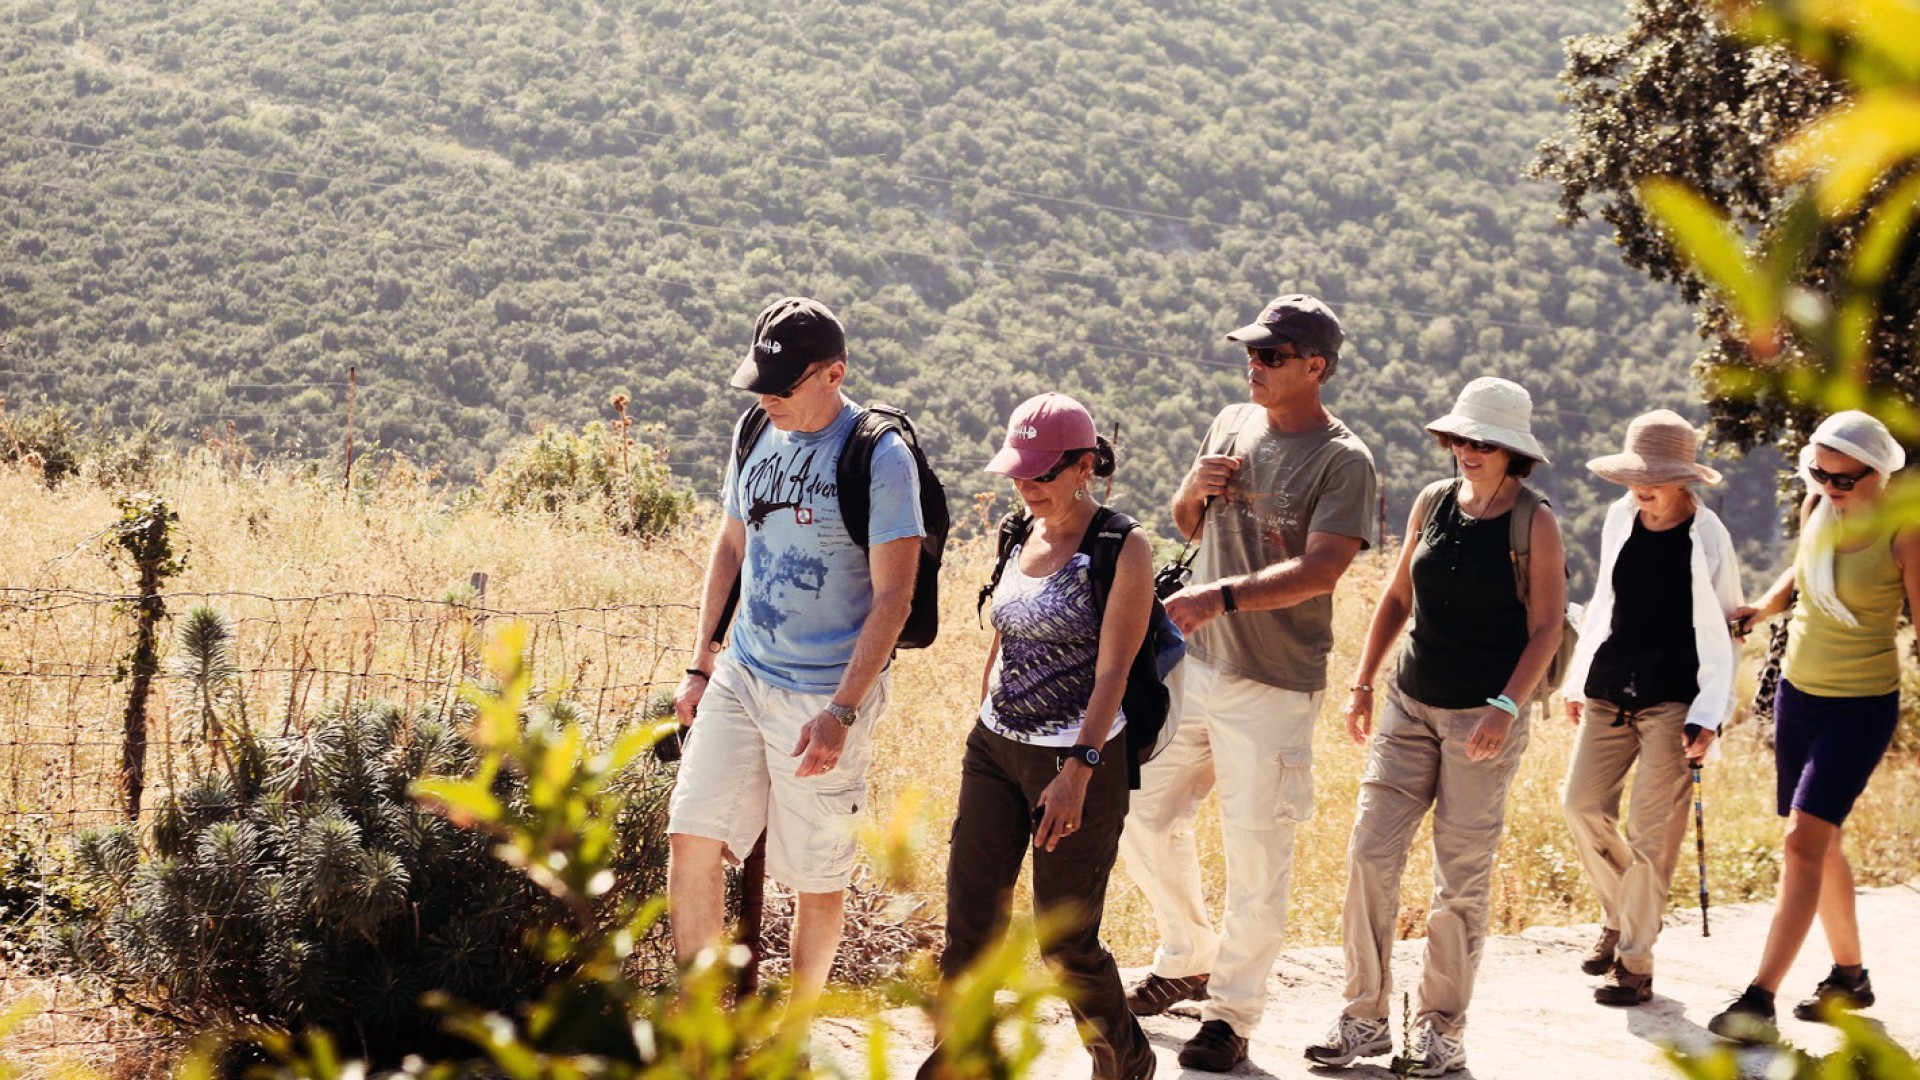 Group of people hiking in a single file line on a trail in the Croatian hillside